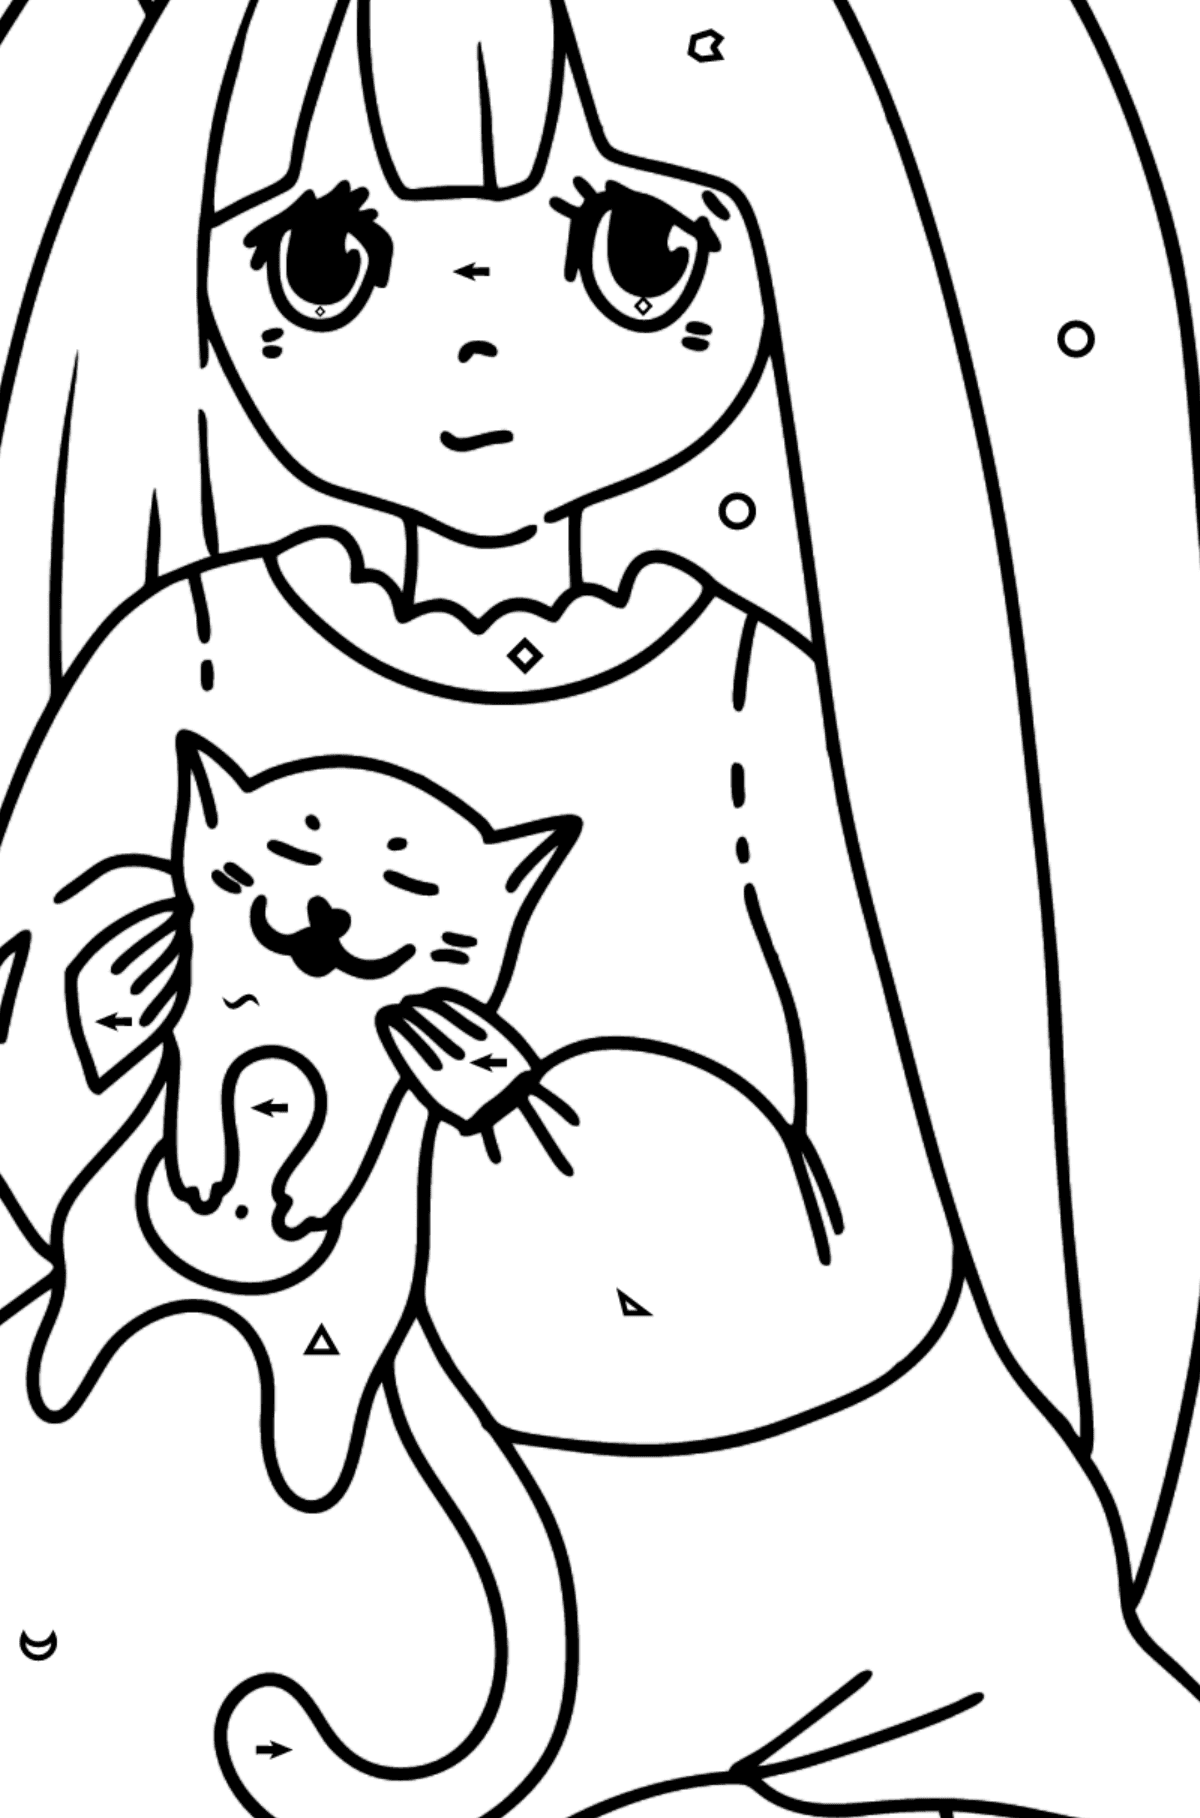 Anime Girl Playing with Kitten coloring page - Coloring by Symbols and Geometric Shapes for Kids